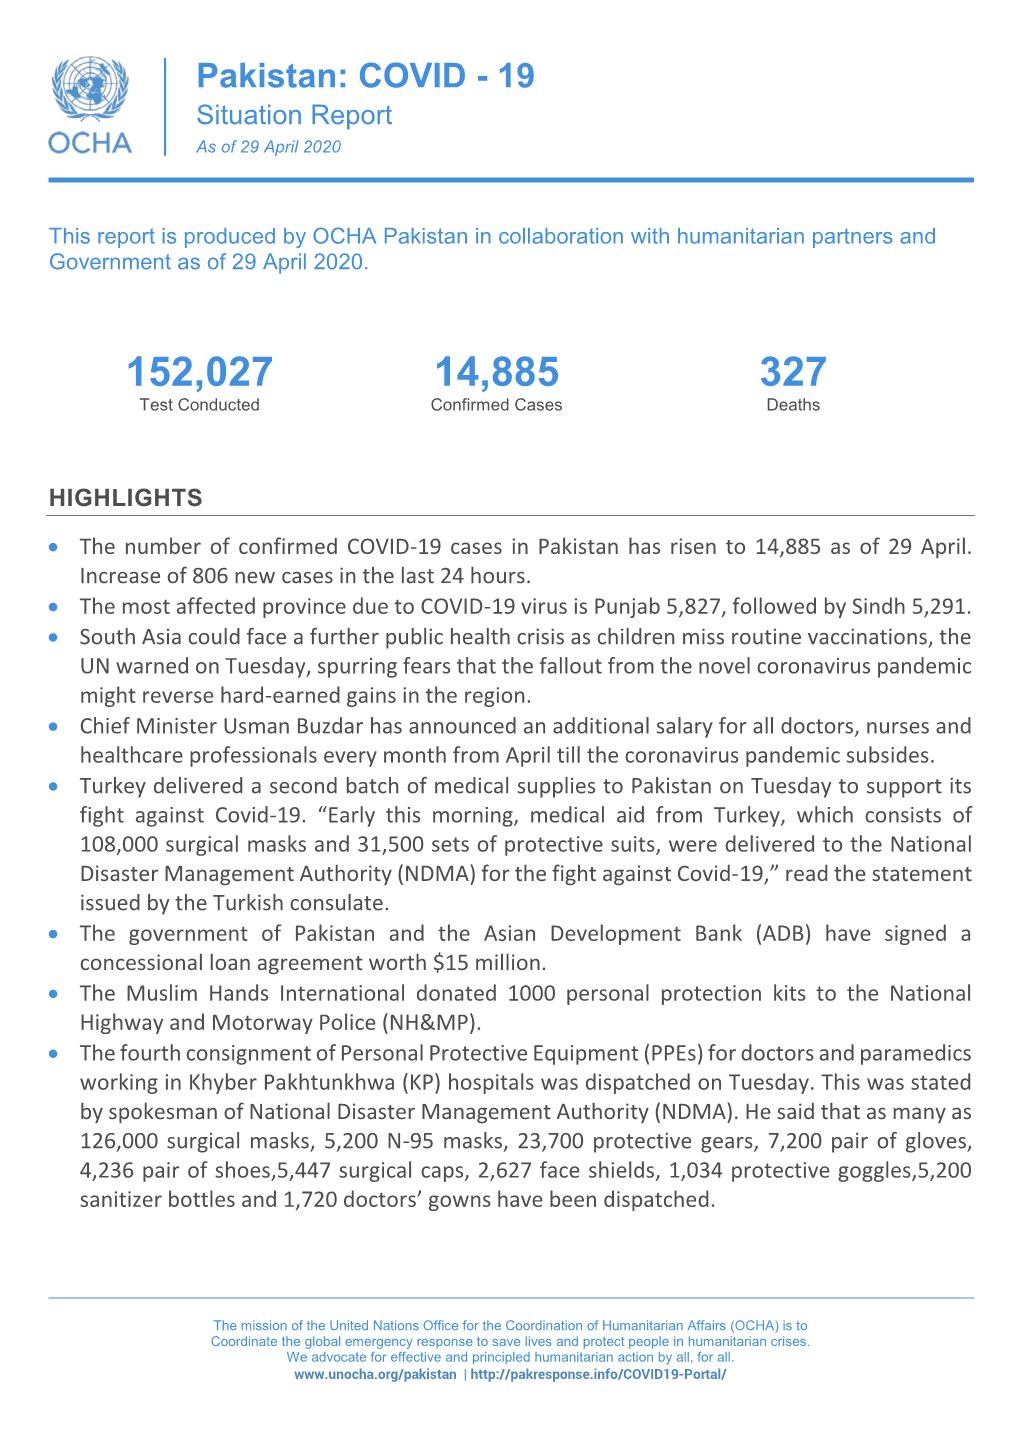 Pakistan: COVID - 19 Situation Report As of 29 April 2020